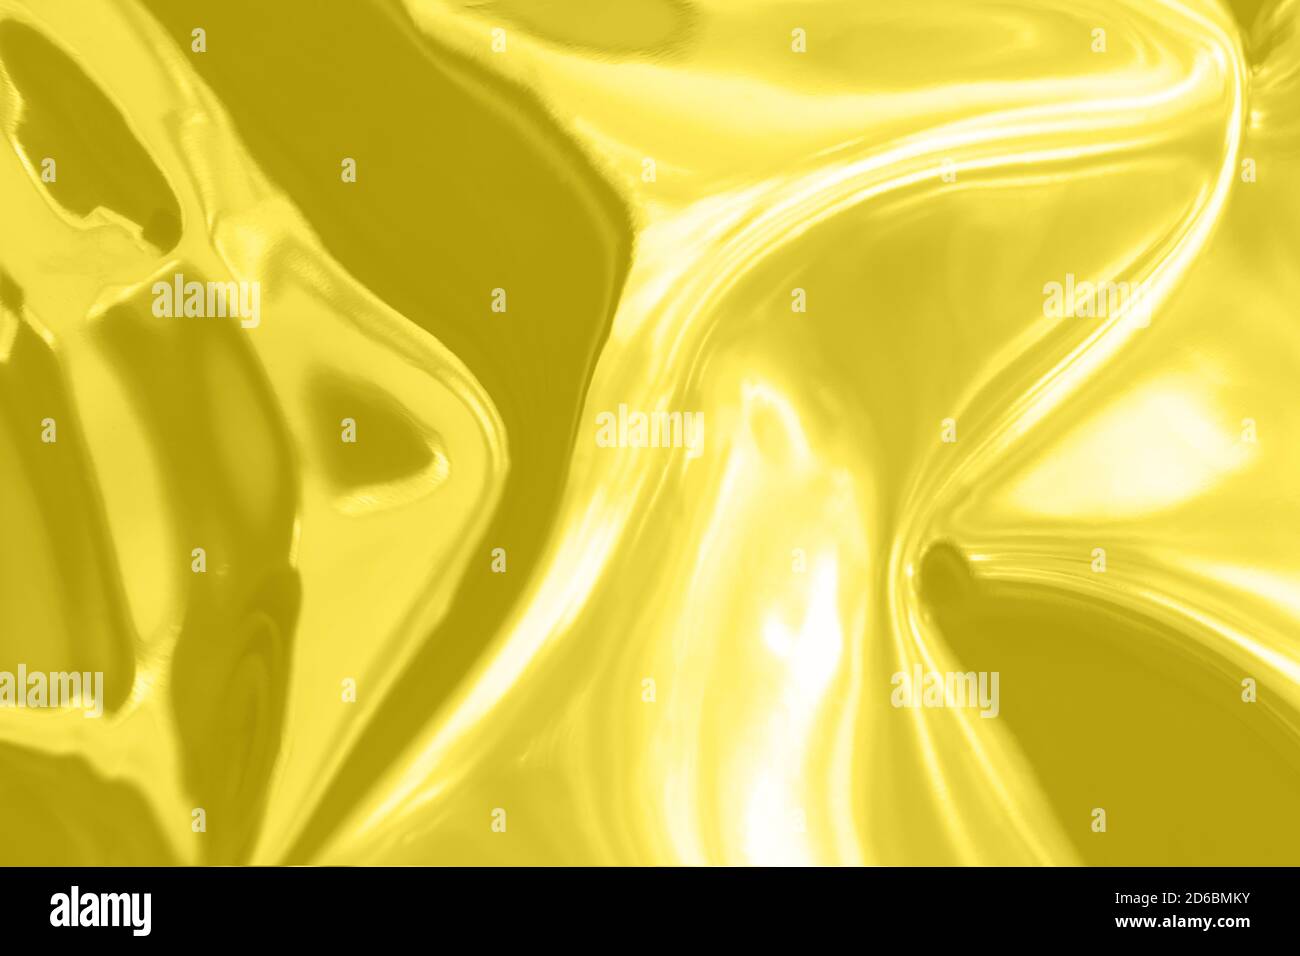 Abstract trendy yellow colored blurred metallic background Stock Photo